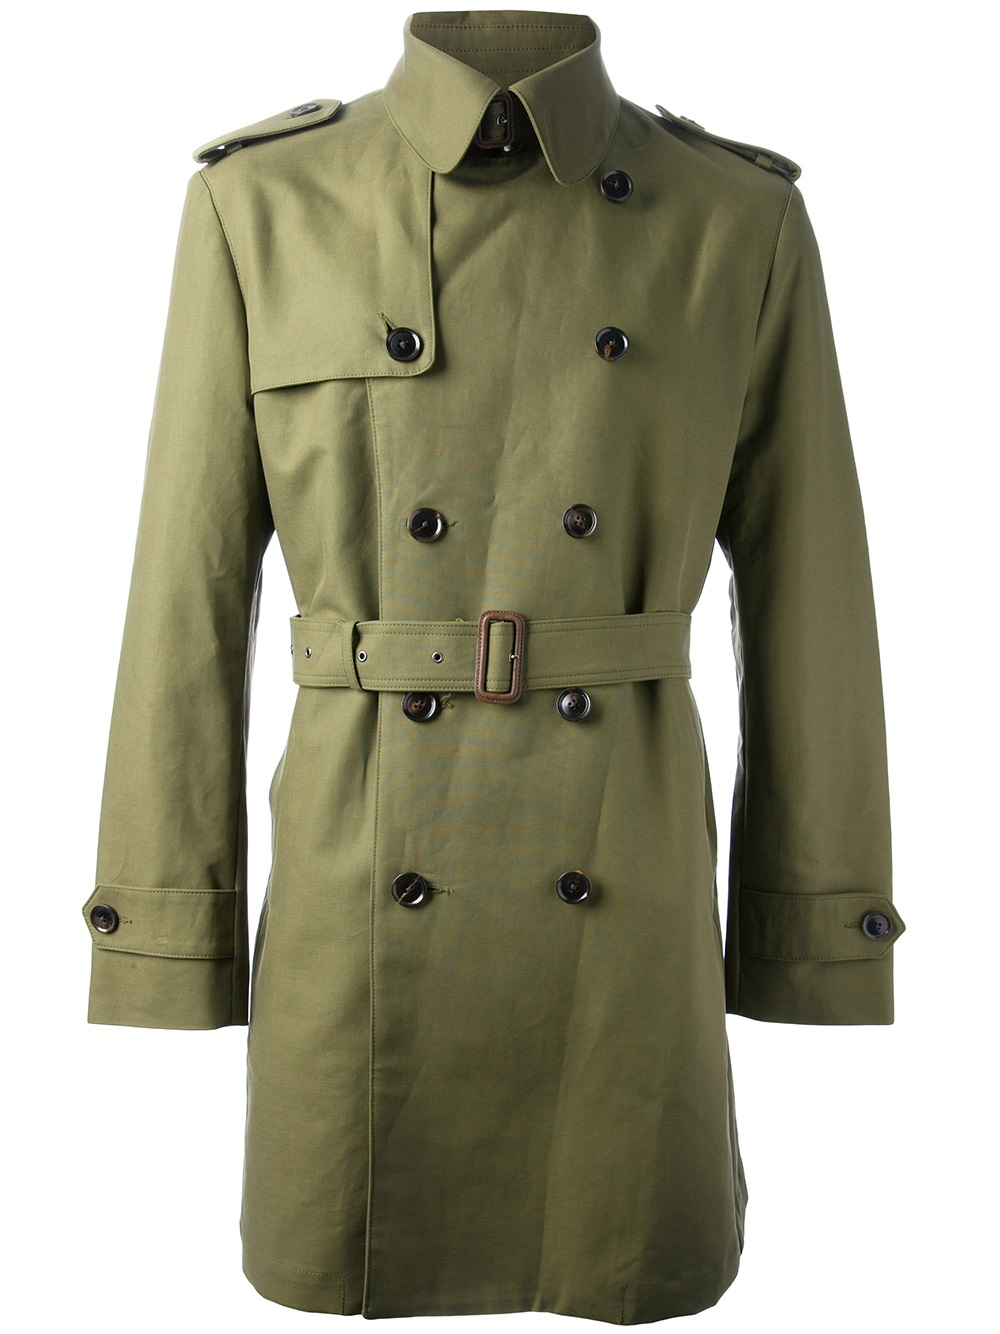 Lyst - Hardy Amies Double Breasted Trench Coat in Green for Men